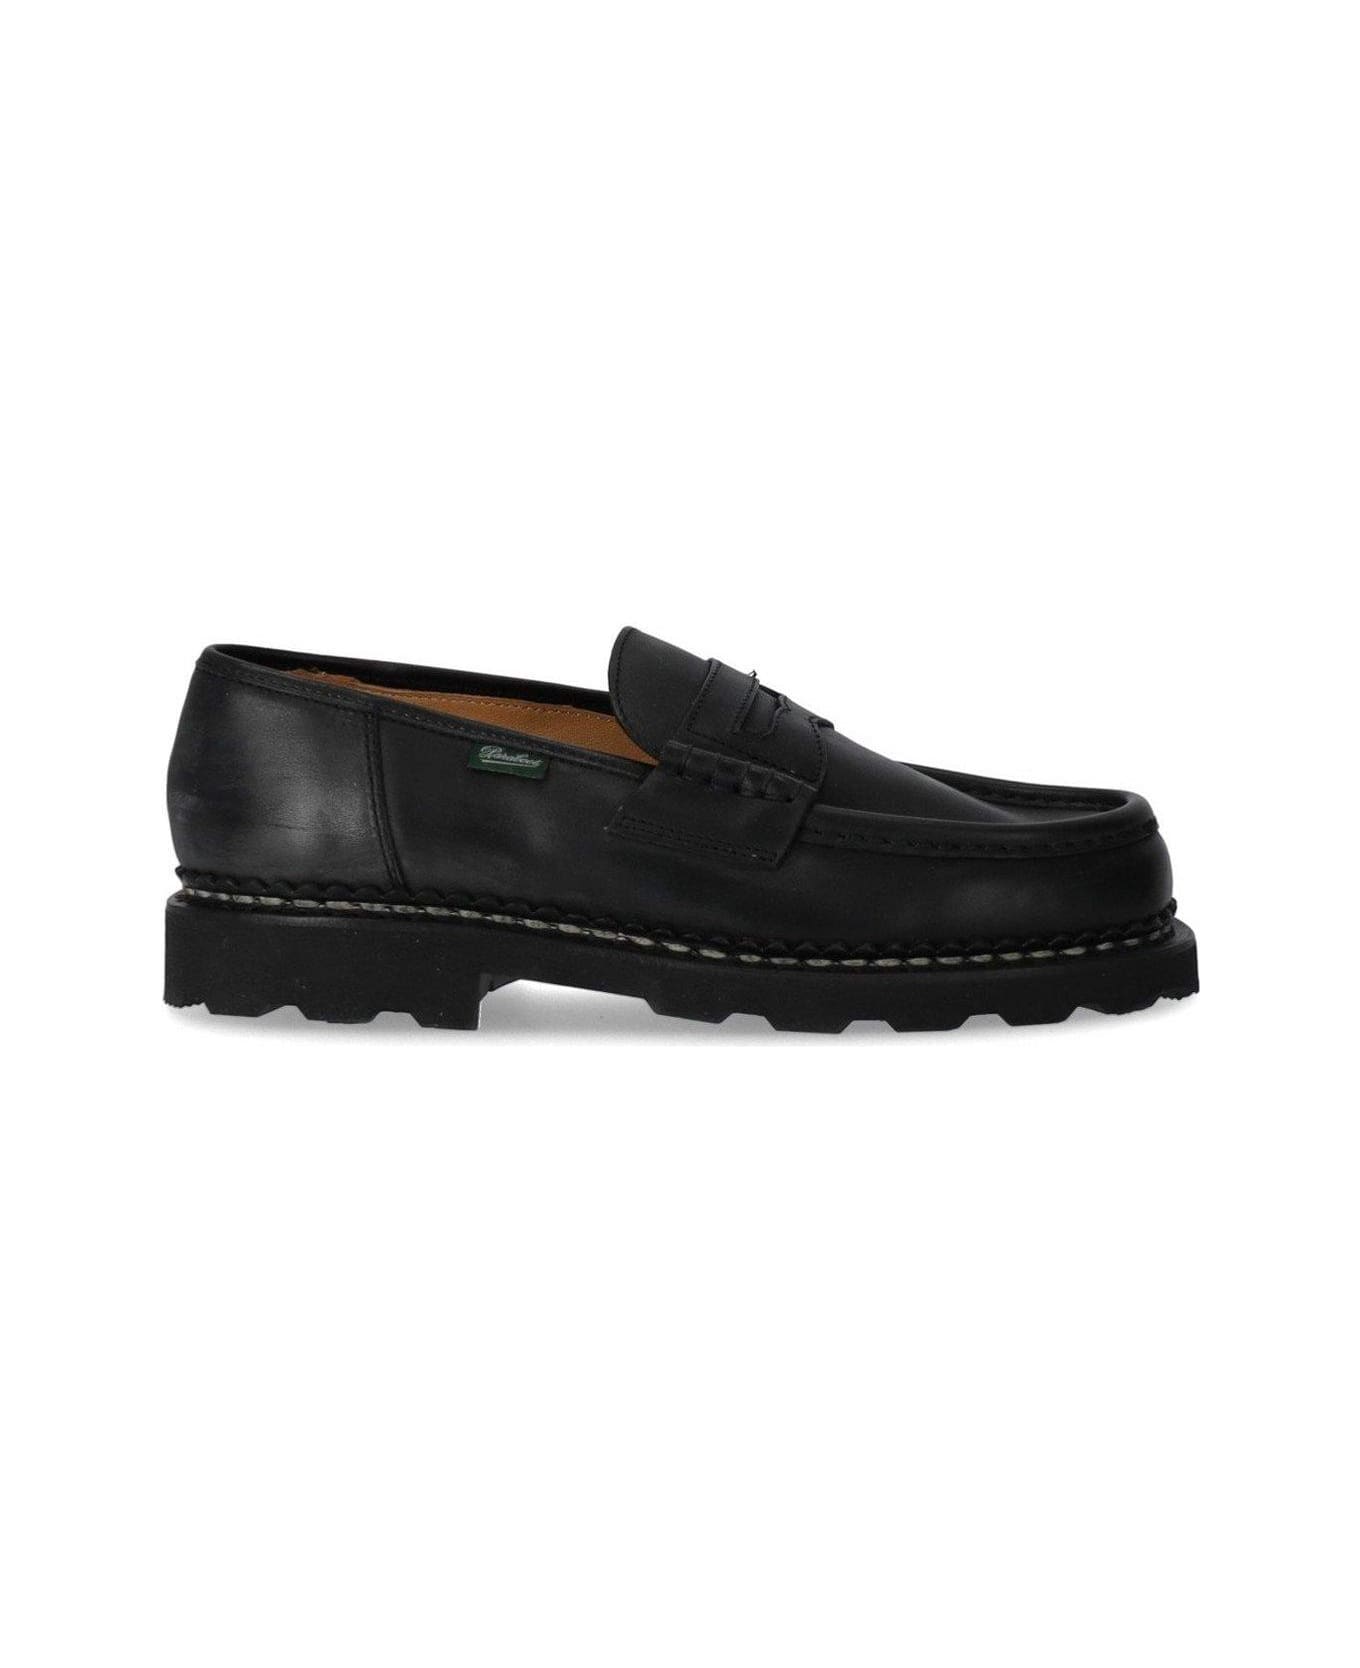 Paraboot Reims Marche Slip-on Loafers - Nero